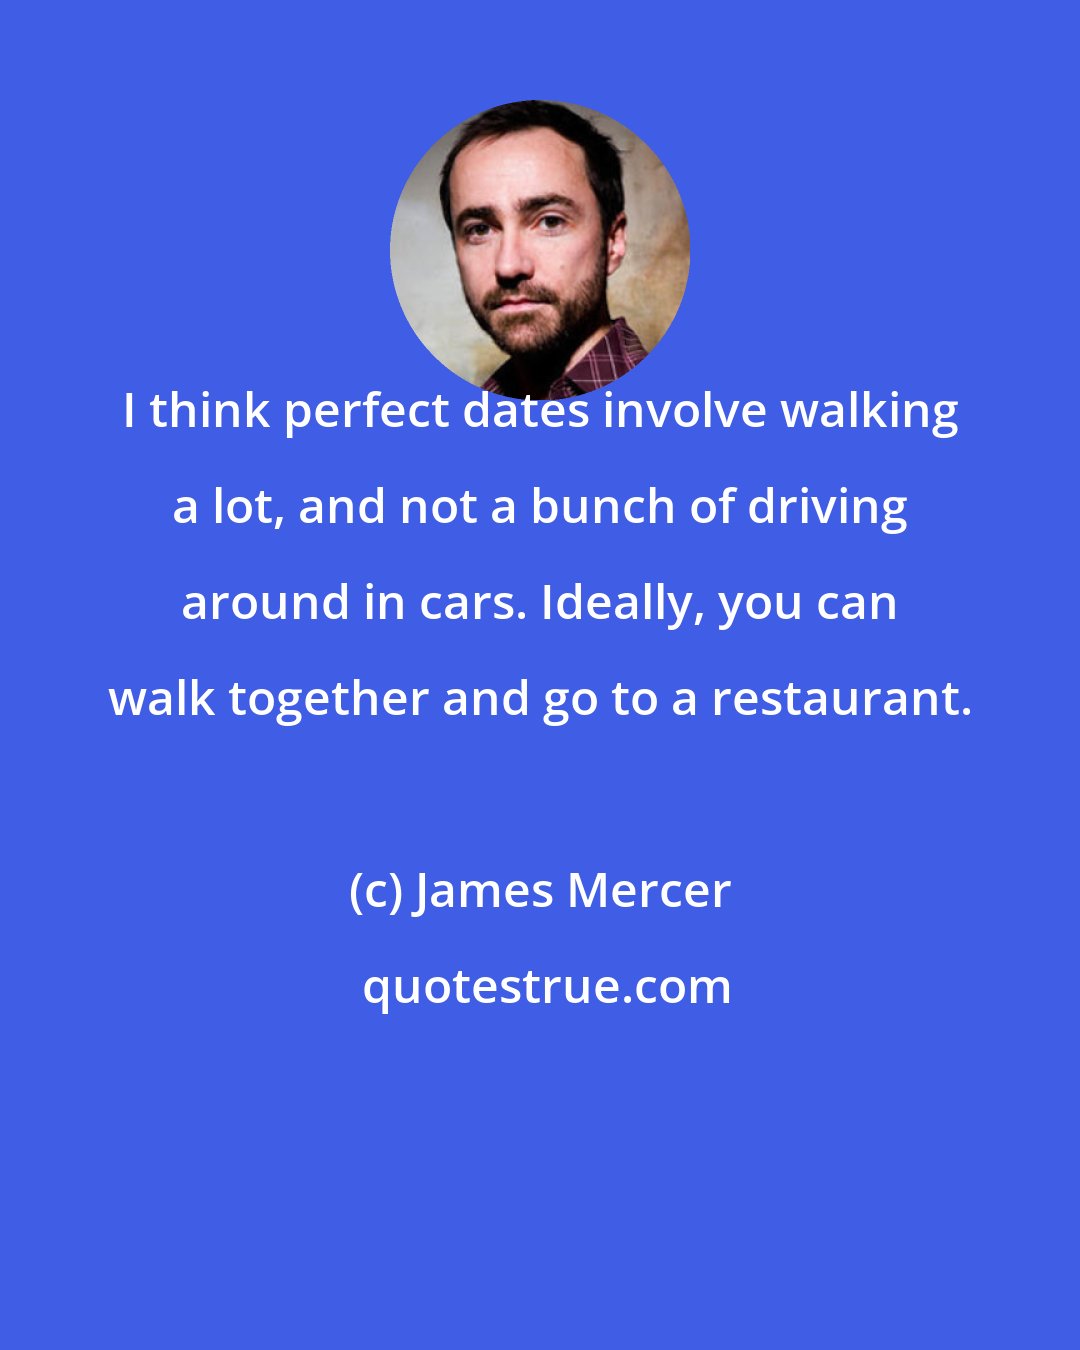 James Mercer: I think perfect dates involve walking a lot, and not a bunch of driving around in cars. Ideally, you can walk together and go to a restaurant.